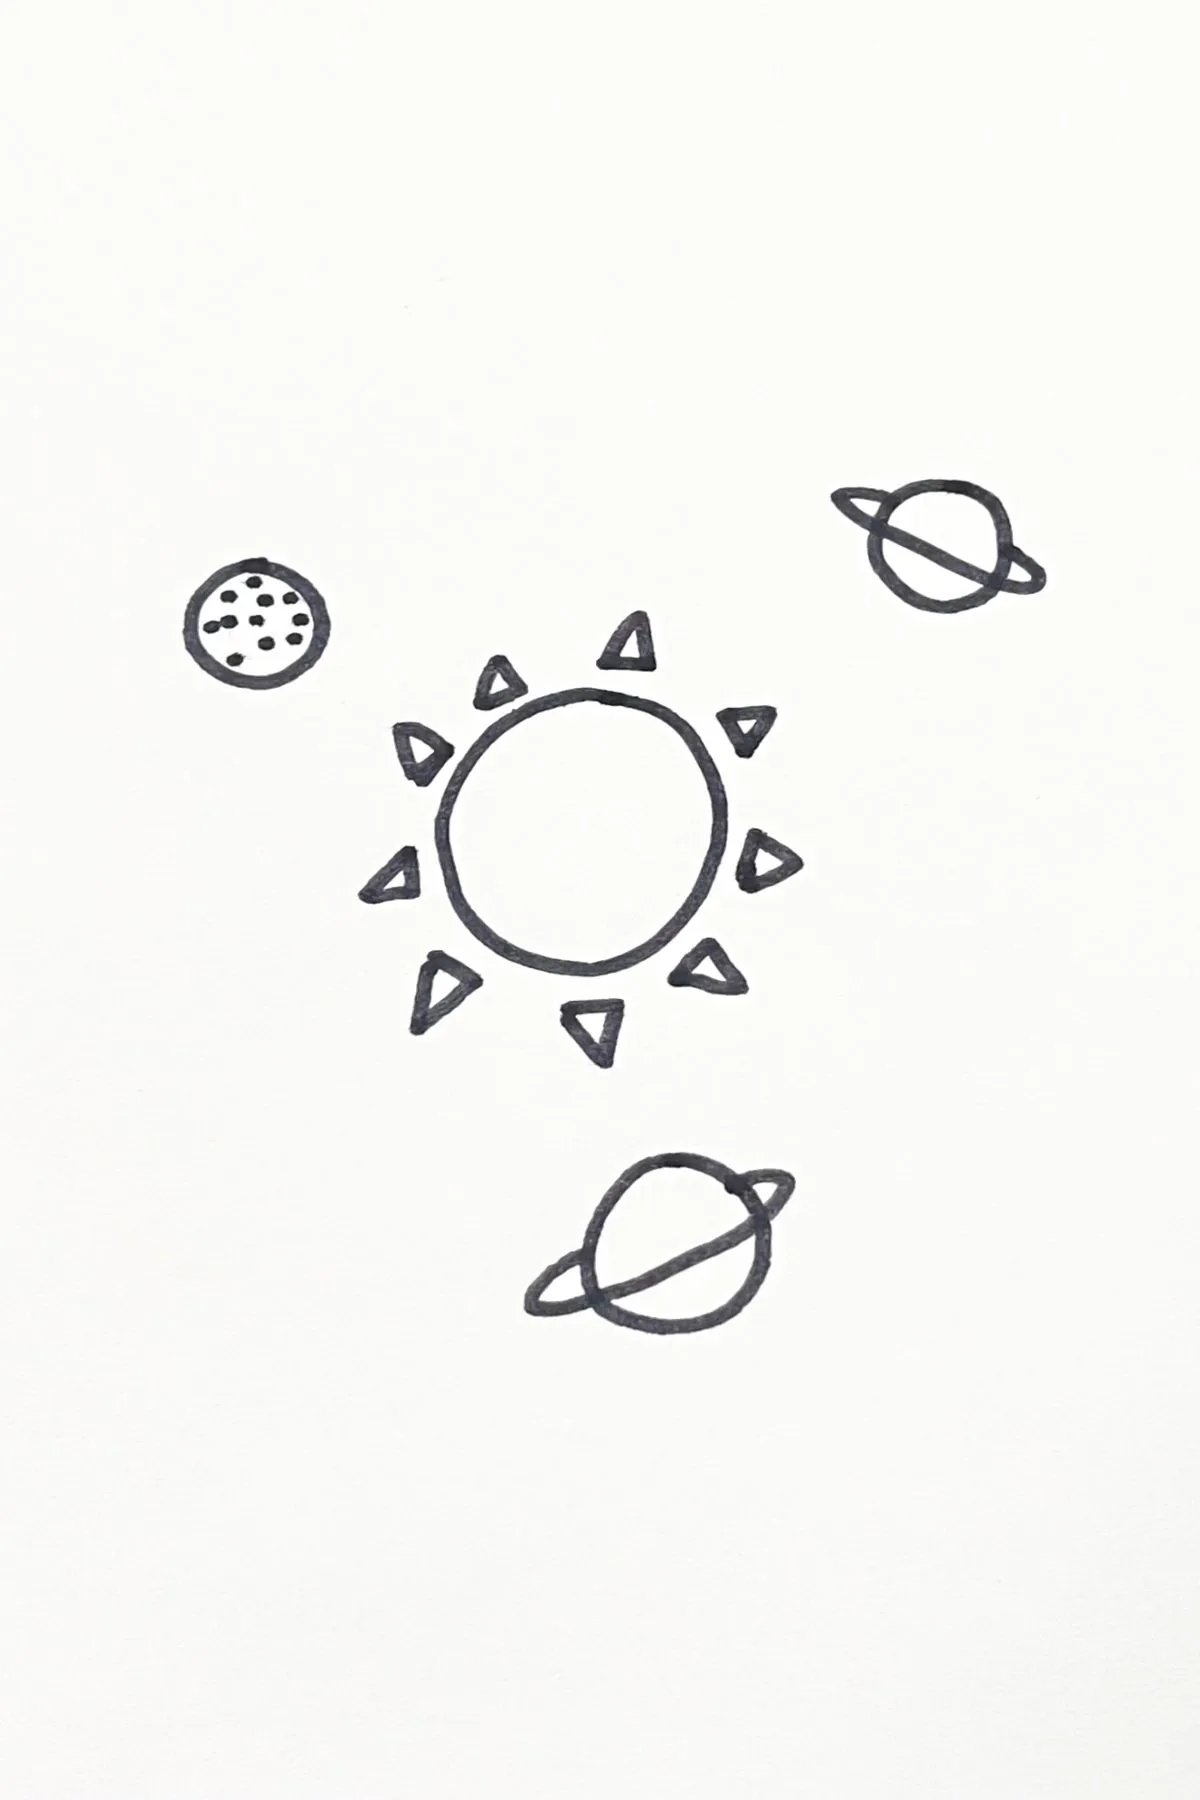 simple planets drawing idea